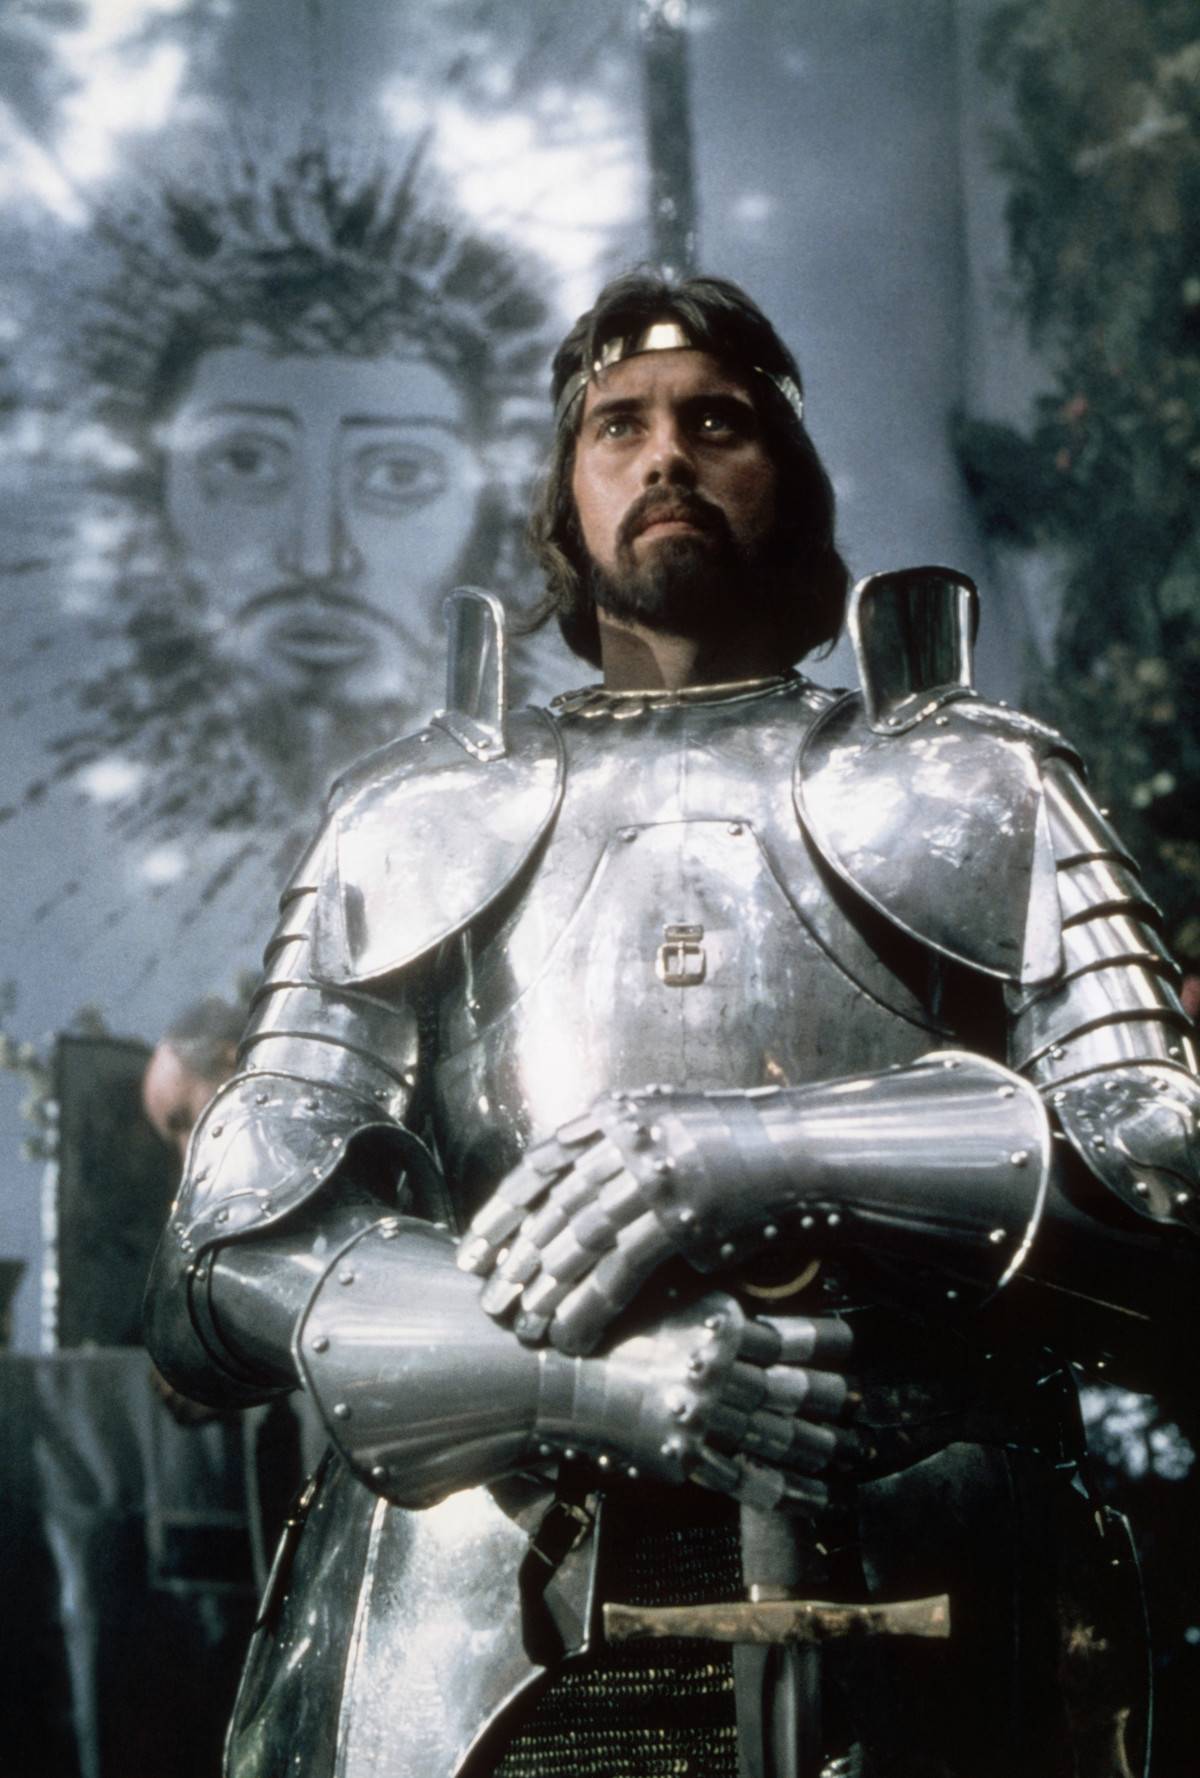 <p>John Boorman directed and co-wrote <i>Excalibur, </i>which many have designated a medieval fantasy film. Its plot takes aim at the 15th century and, specifically, the historical folklore surrounding King Arthur. </p> <p>Boorman's recreation of Arthur amid the turmoil of the Dark Ages received critical acclaim, including winning the award for Best Artistic Contribution at the 1981 Cannes Film Festival. </p>